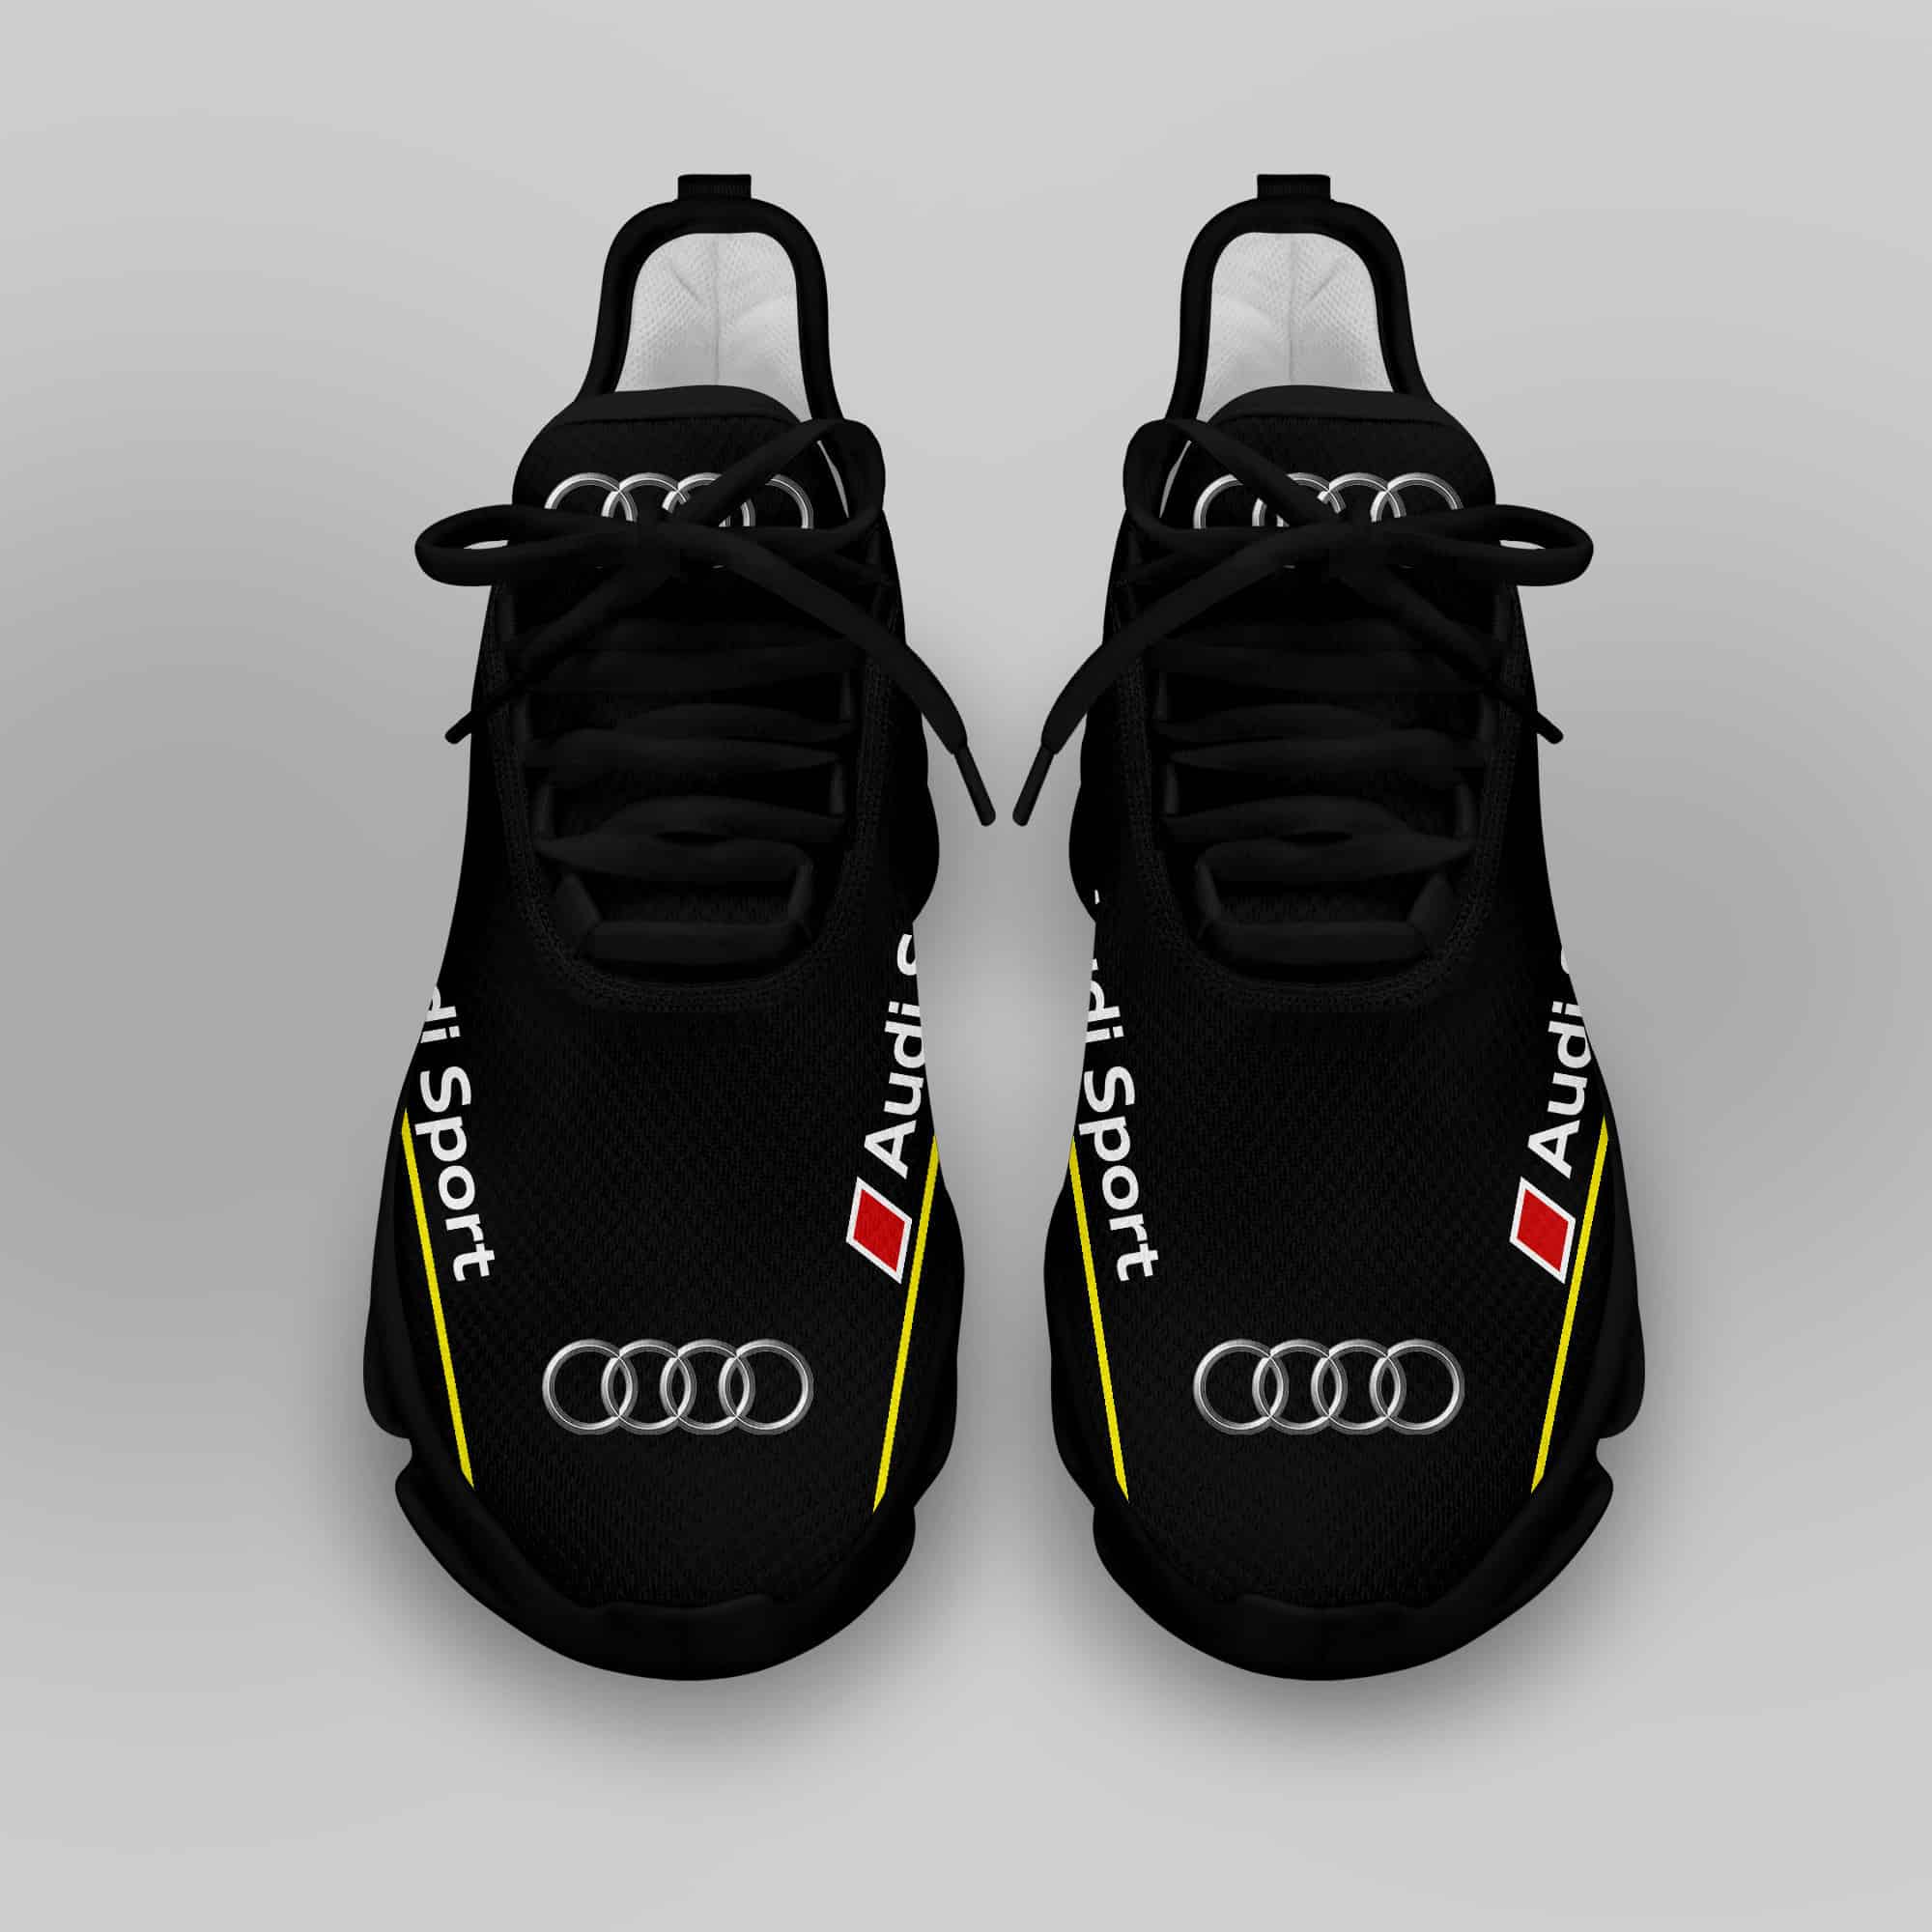 Audi Sport Running Shoes Max Soul Shoes Sneakers Ver 36 4